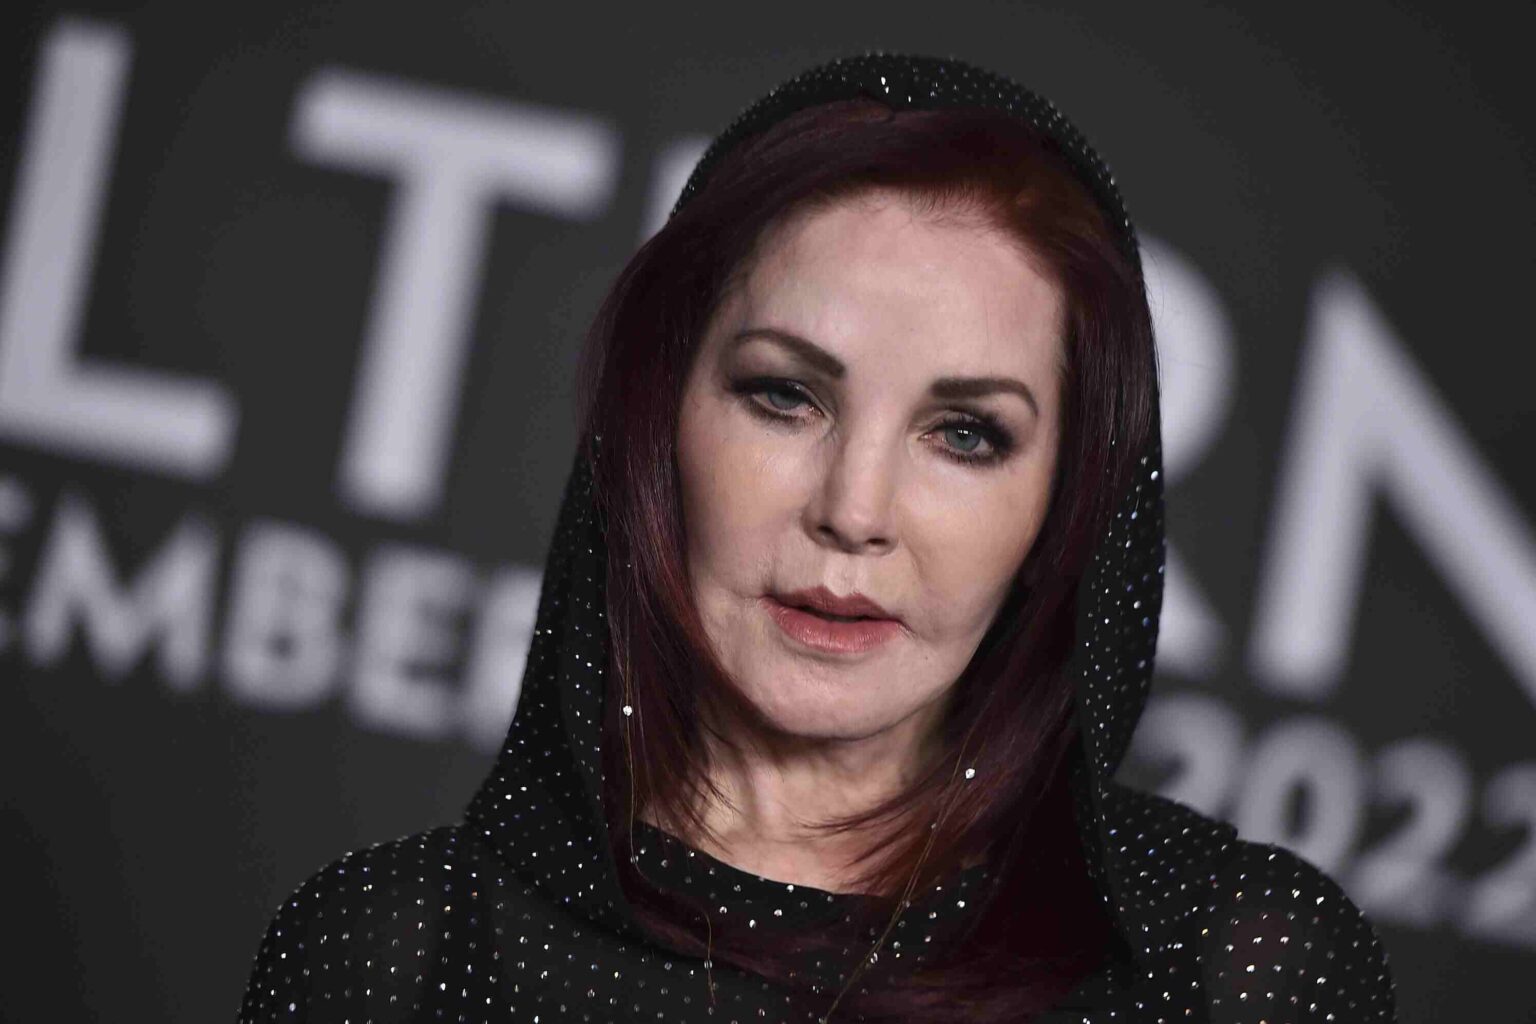 Priscilla Presley contests validity of Lisa Marie's will